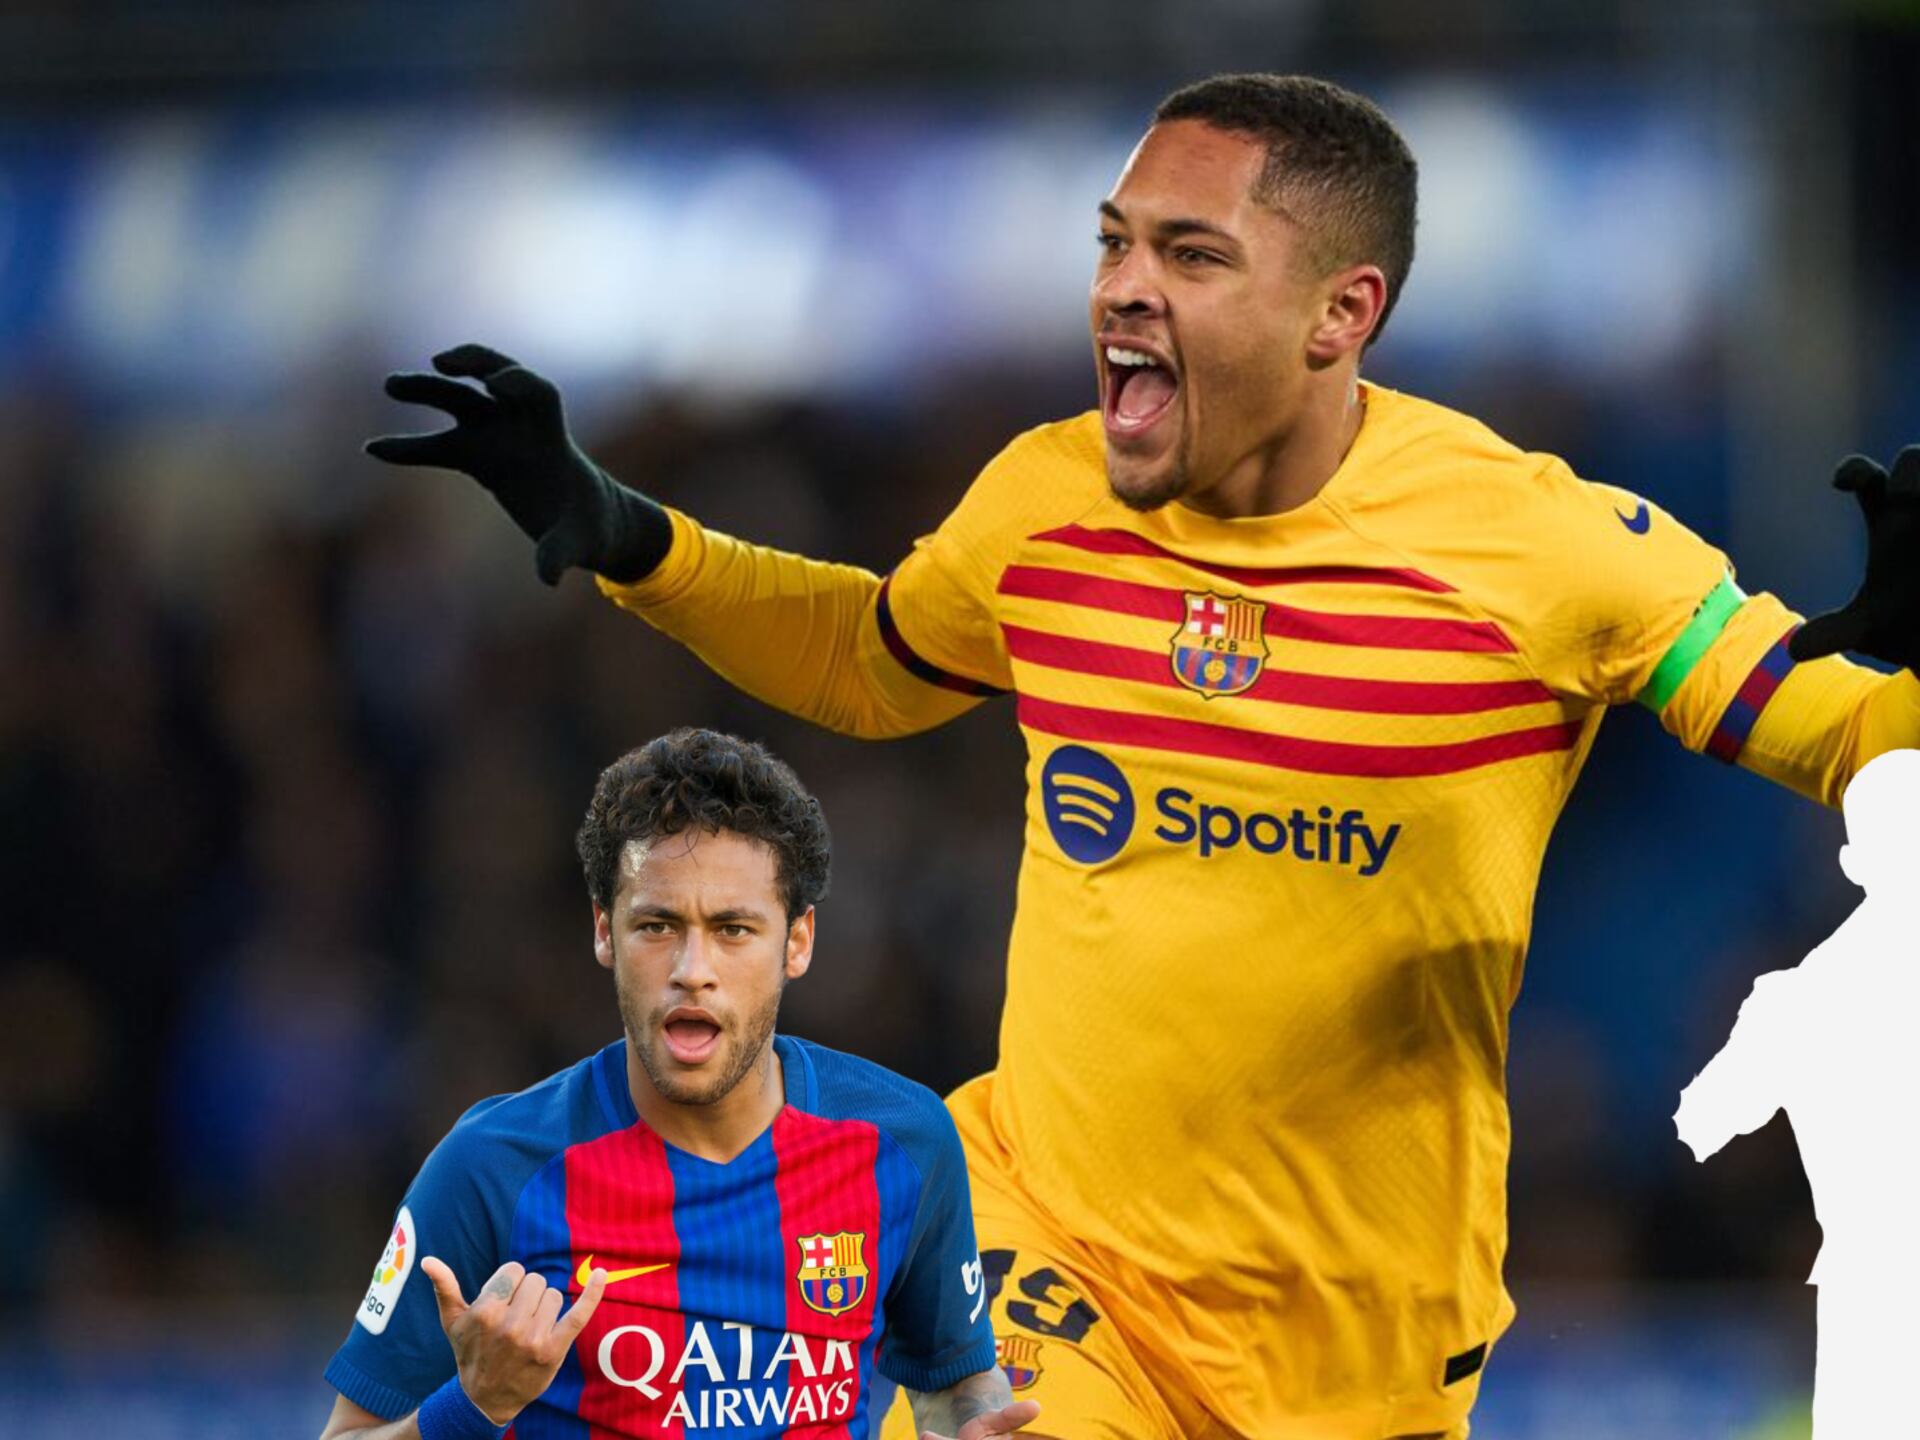 New Neymar to Barca? Roque's agent tells Barca should sign this young Brazilian